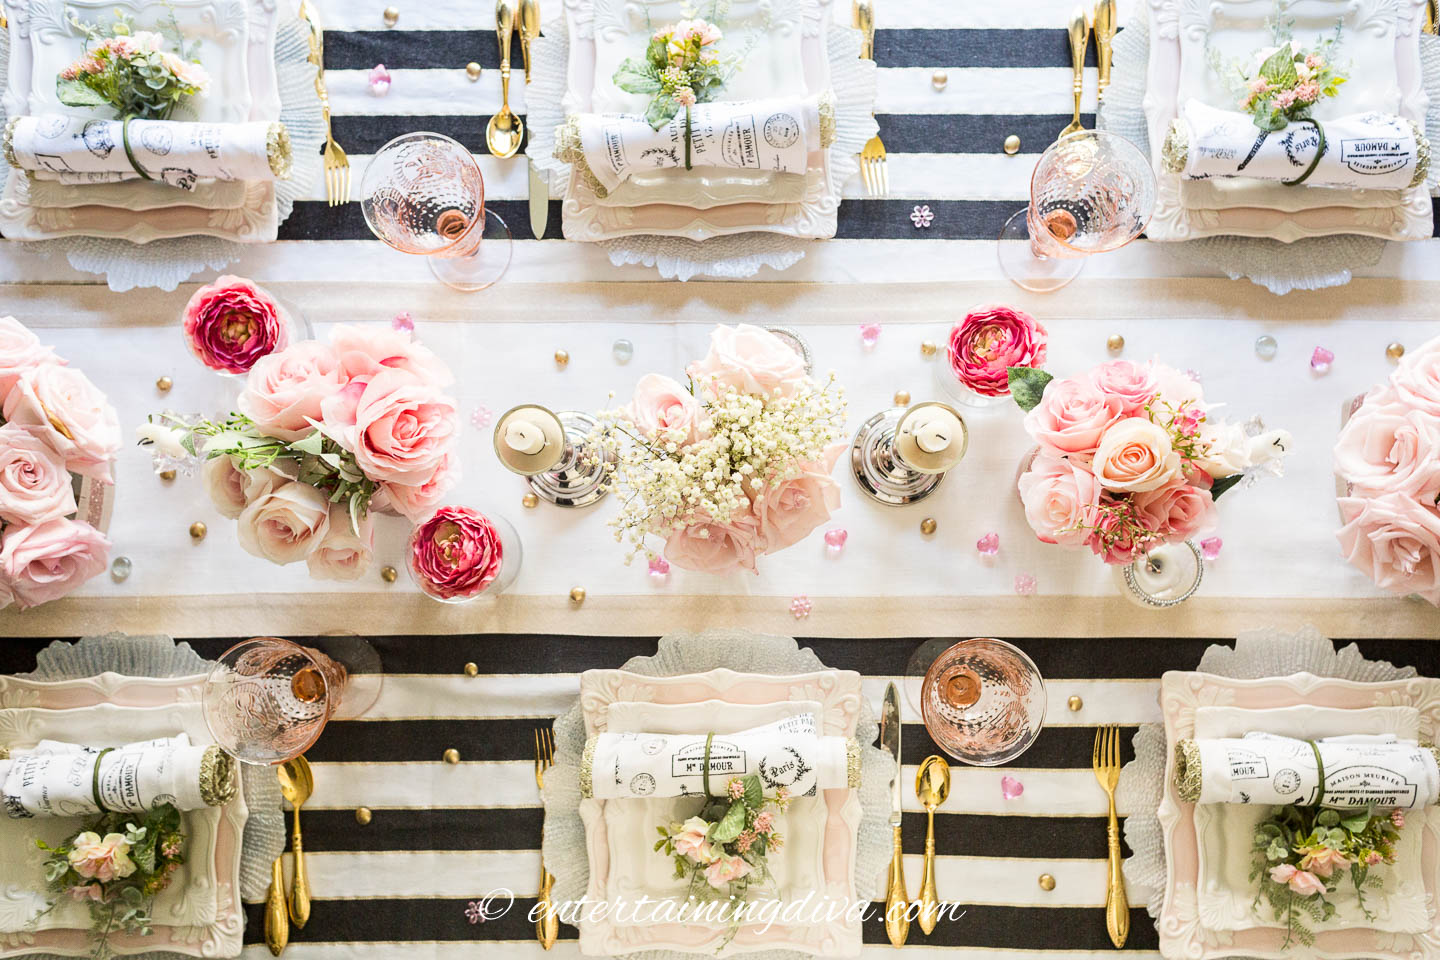 Black, white and blush pink tablescape overhead view